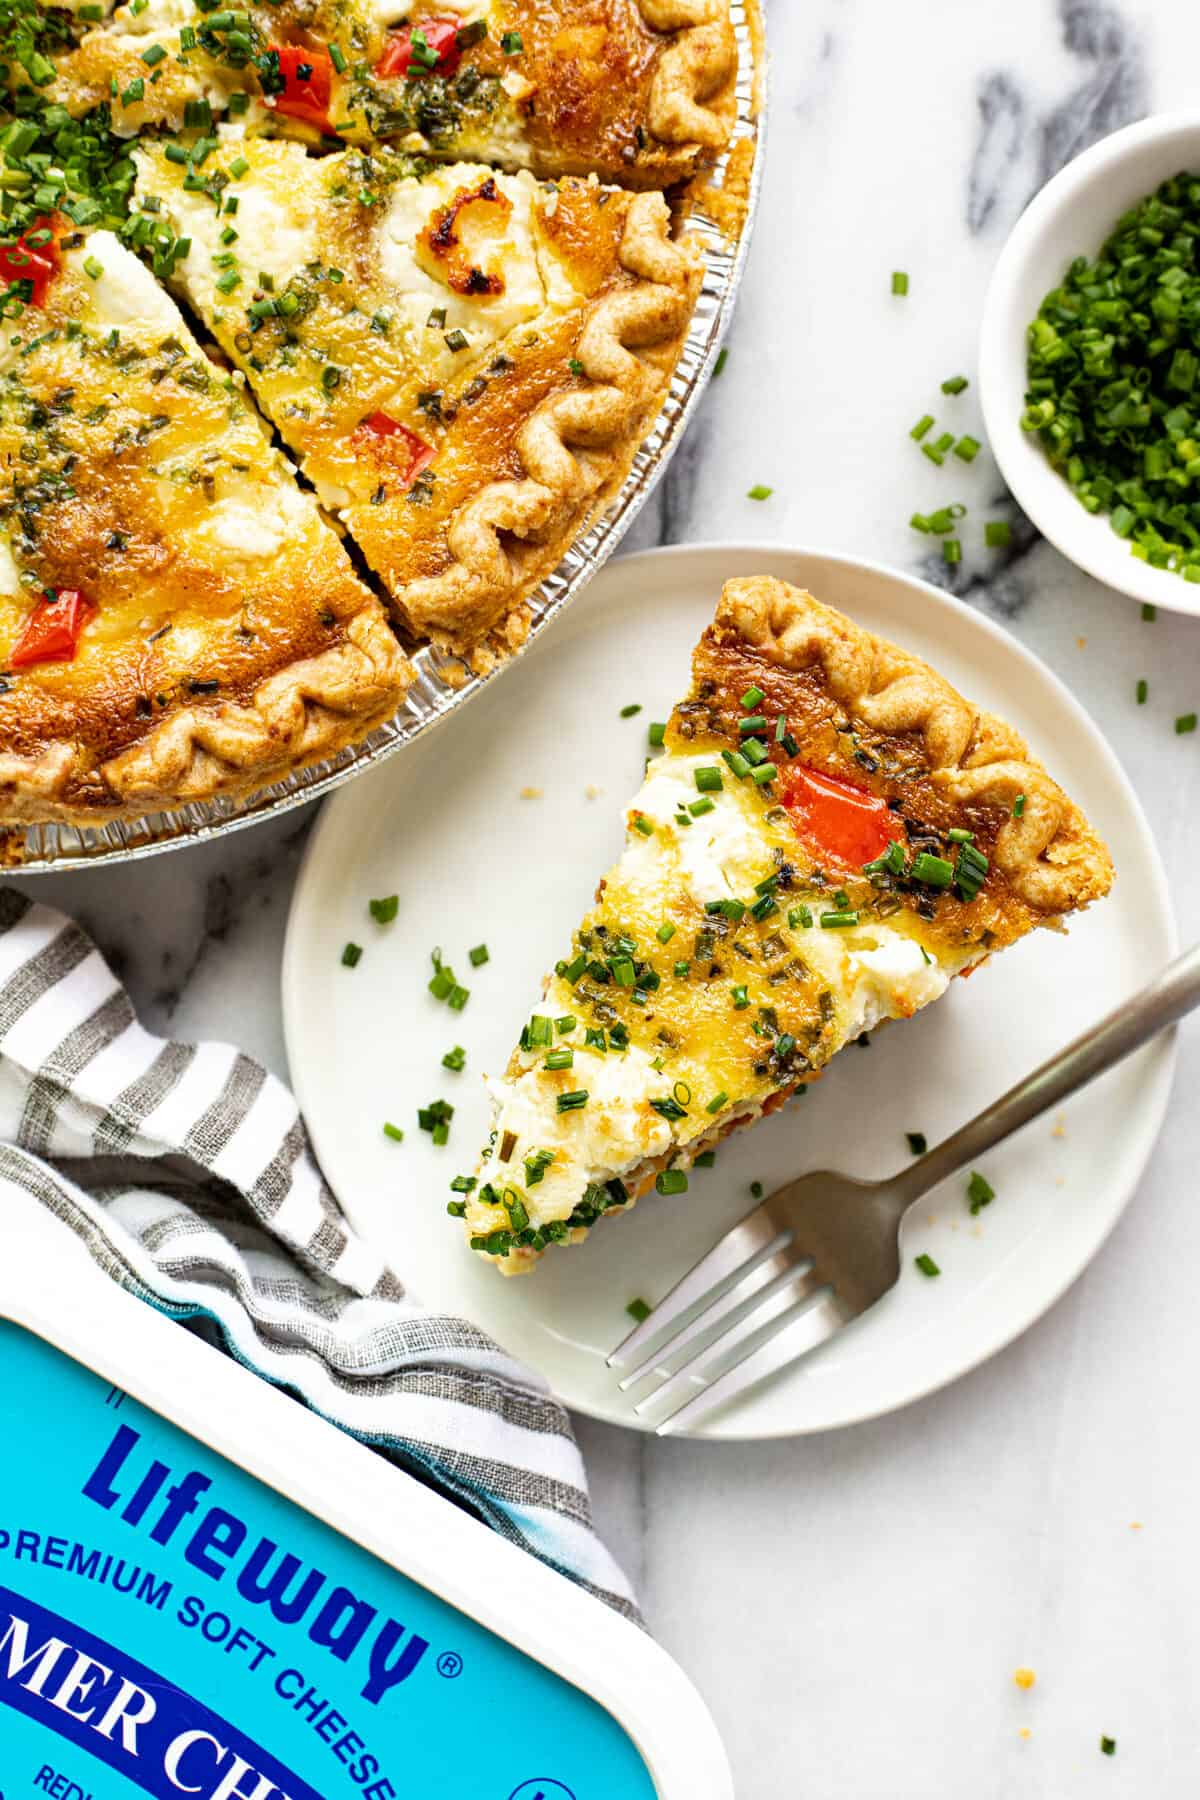 A slice of quiche on a small plate next to the pan of quiche.